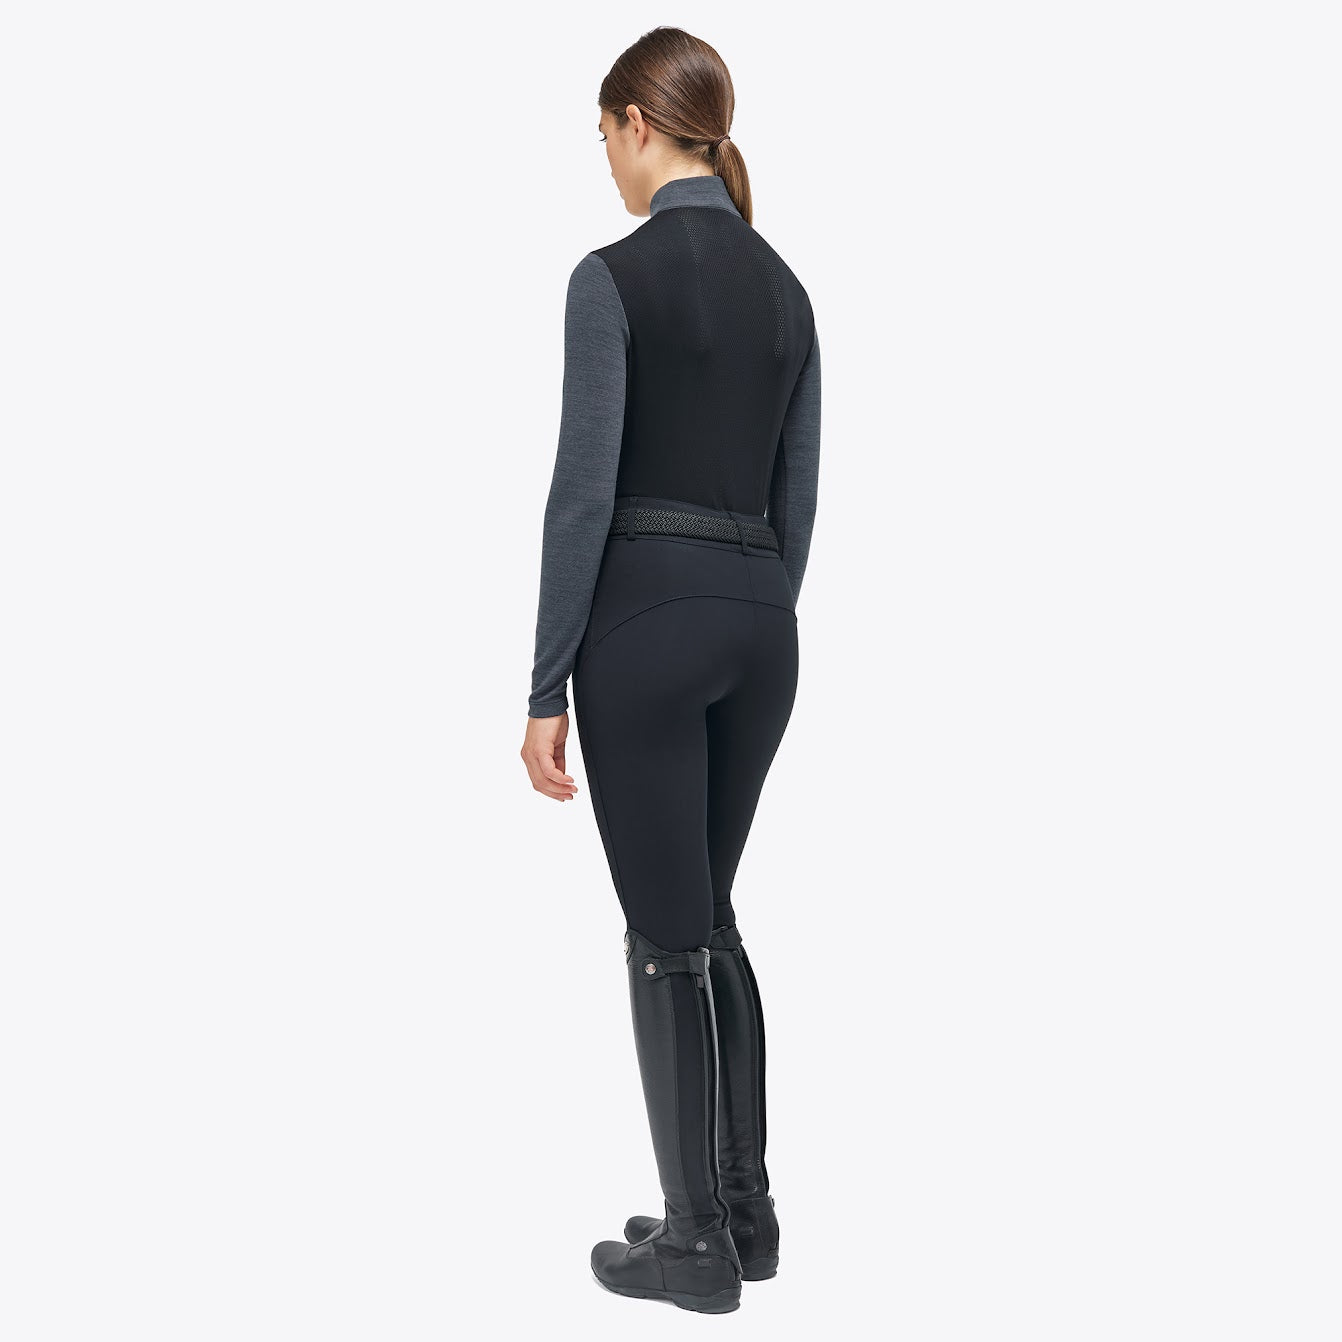 The Cavalleria Toscana Grey and black Revolution Premier Tech Wool training top. The slimming silhouette is feminine yet sporty. Black fine tech knit back gives maximum freedom of movement. This CT training top is perfect for the shows, training or on the yard. 